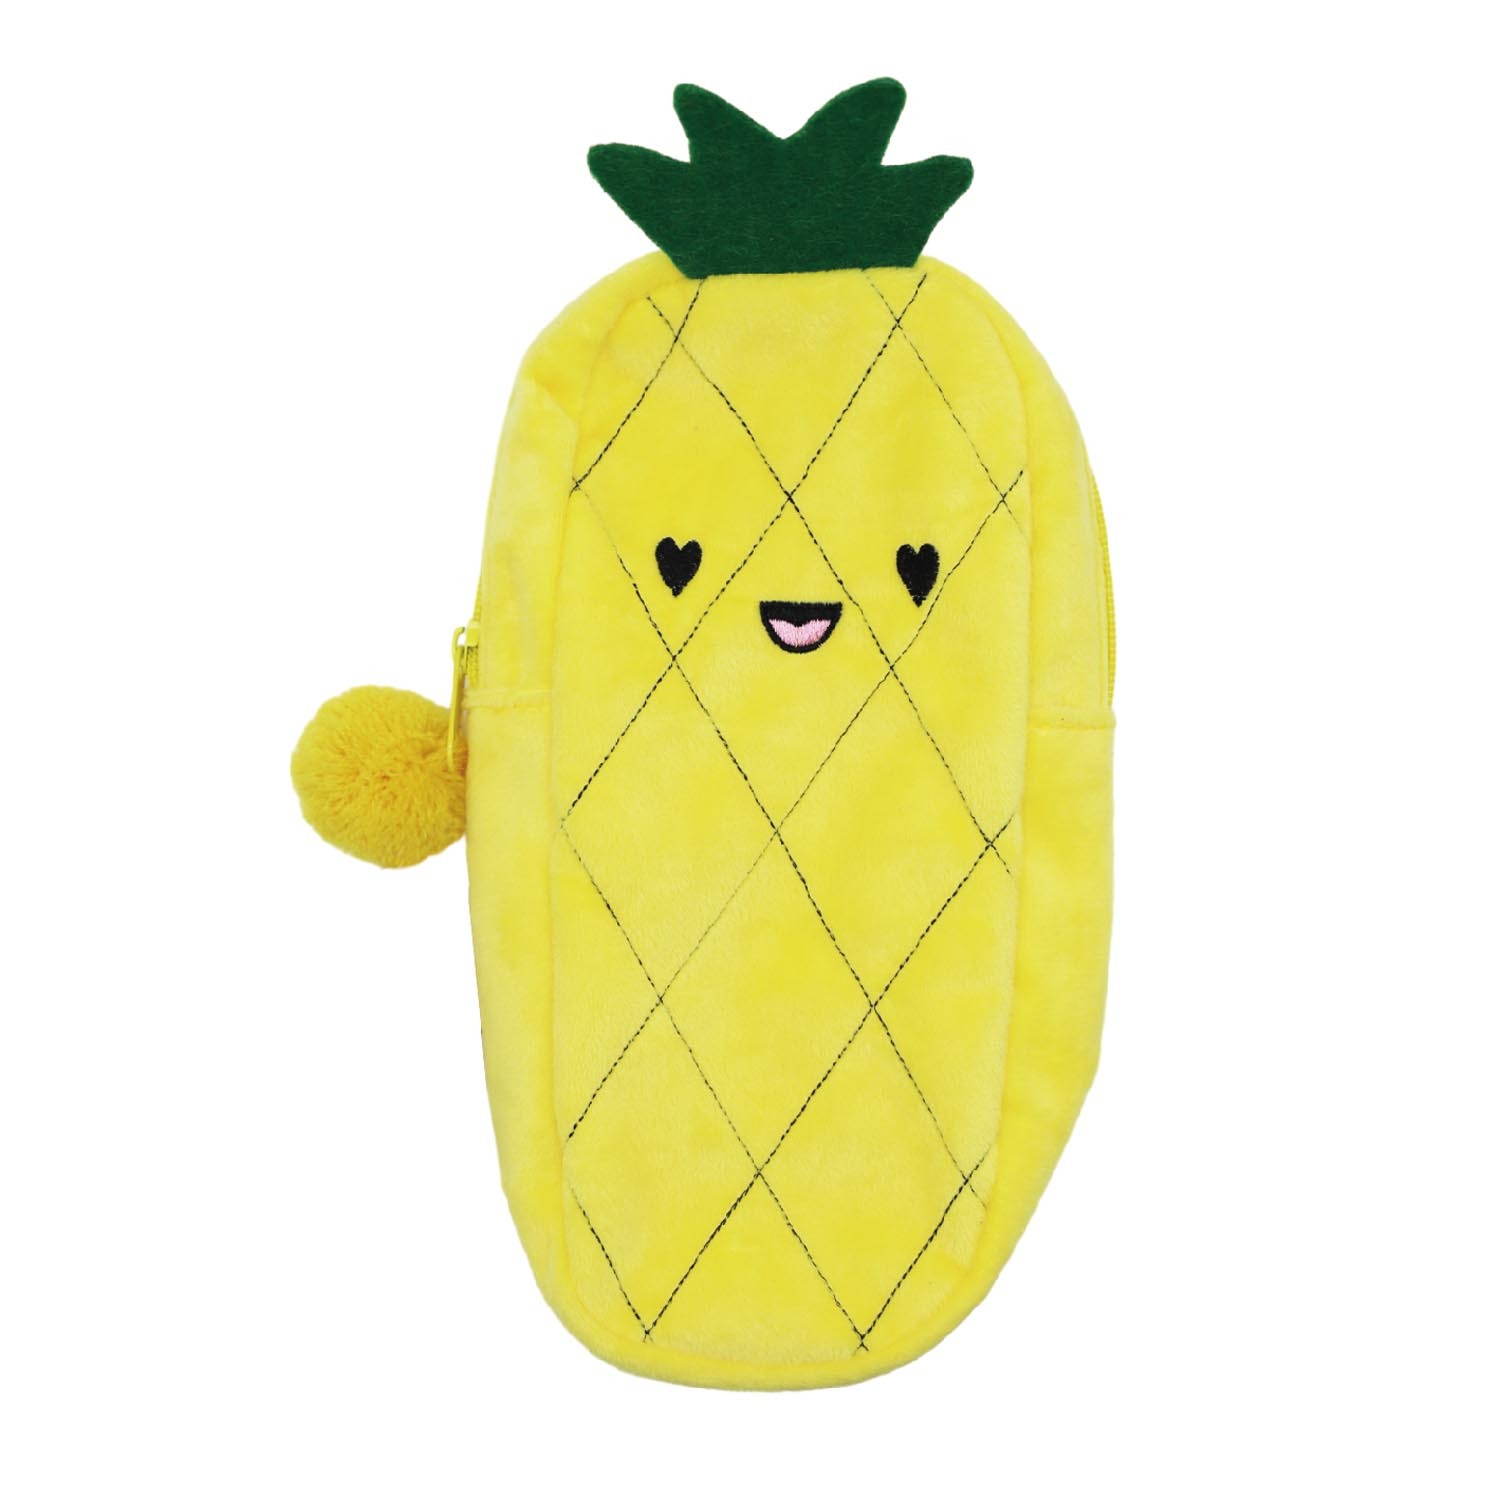 Summer Fruits Pencil Case - Yellow Image 3